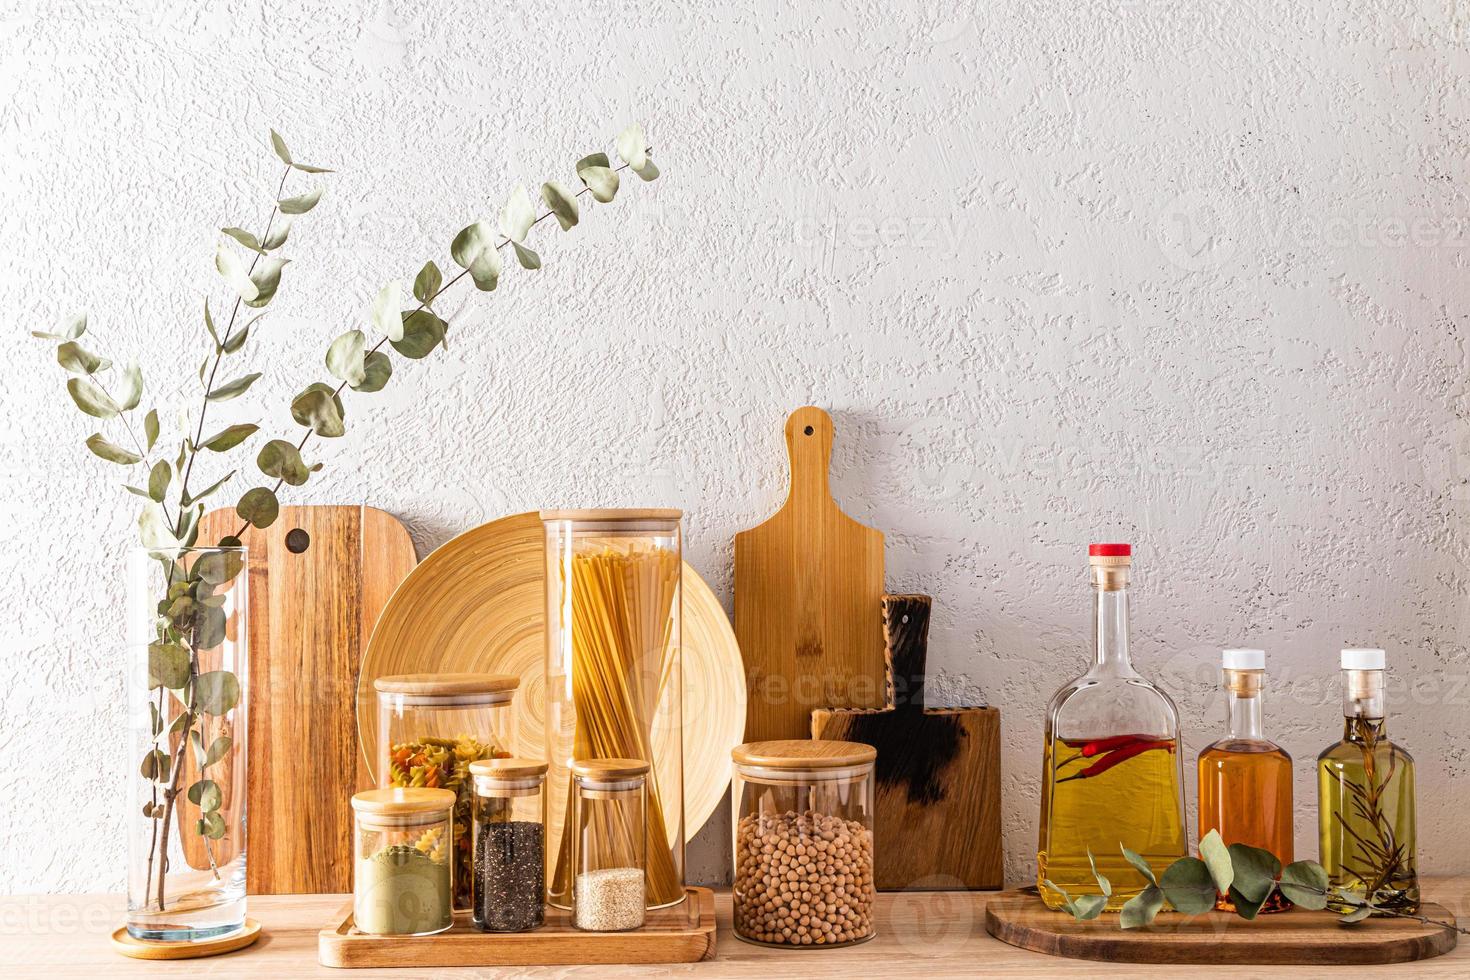 various kinds of cutting wooden boards and glass containers for storing products on the kitchen countertop. Eco-friendly items . kitchen background. photo